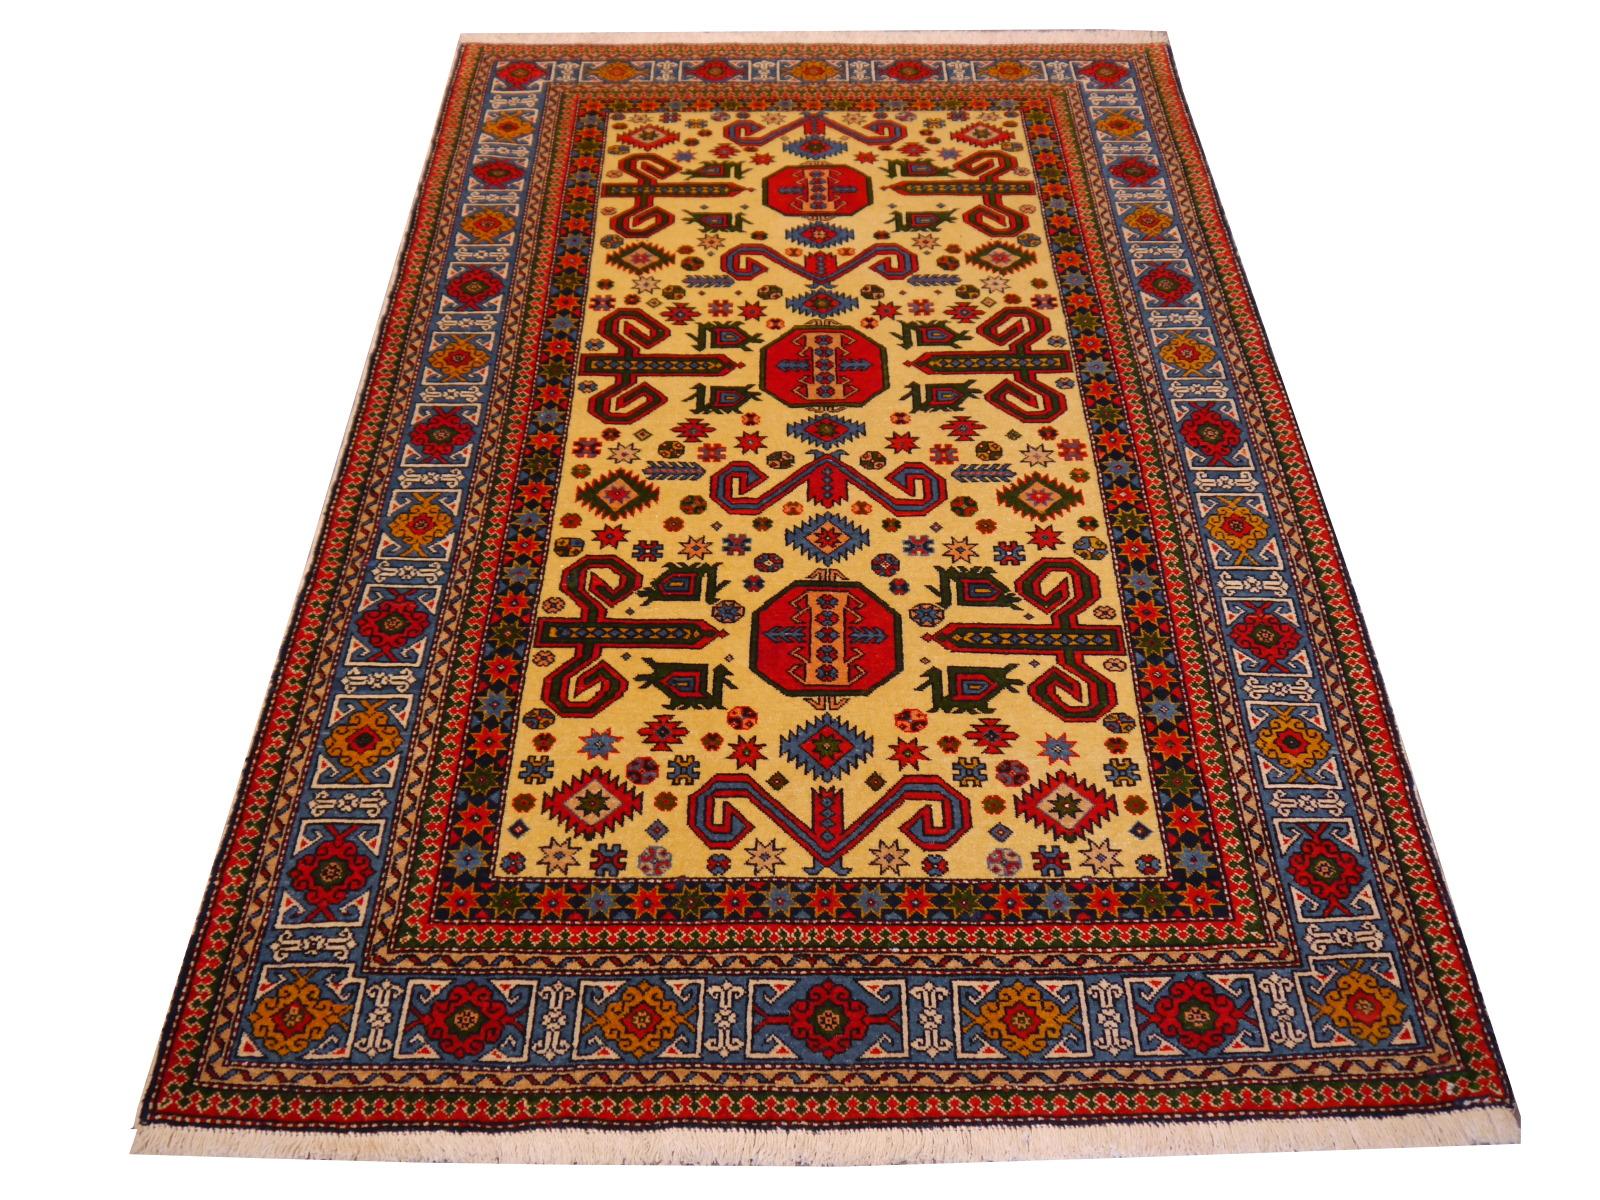 Vintage Perepedil Kazak rug, hand knotted mid-20th century.

A beautiful Kazak rug from Azerbaijan. Best quality wool and vibrant colors. 
 
• Beautiful semi antique Kazak rug
• All handmade
• Pile pure wool
• Traditional Perepedil design
•